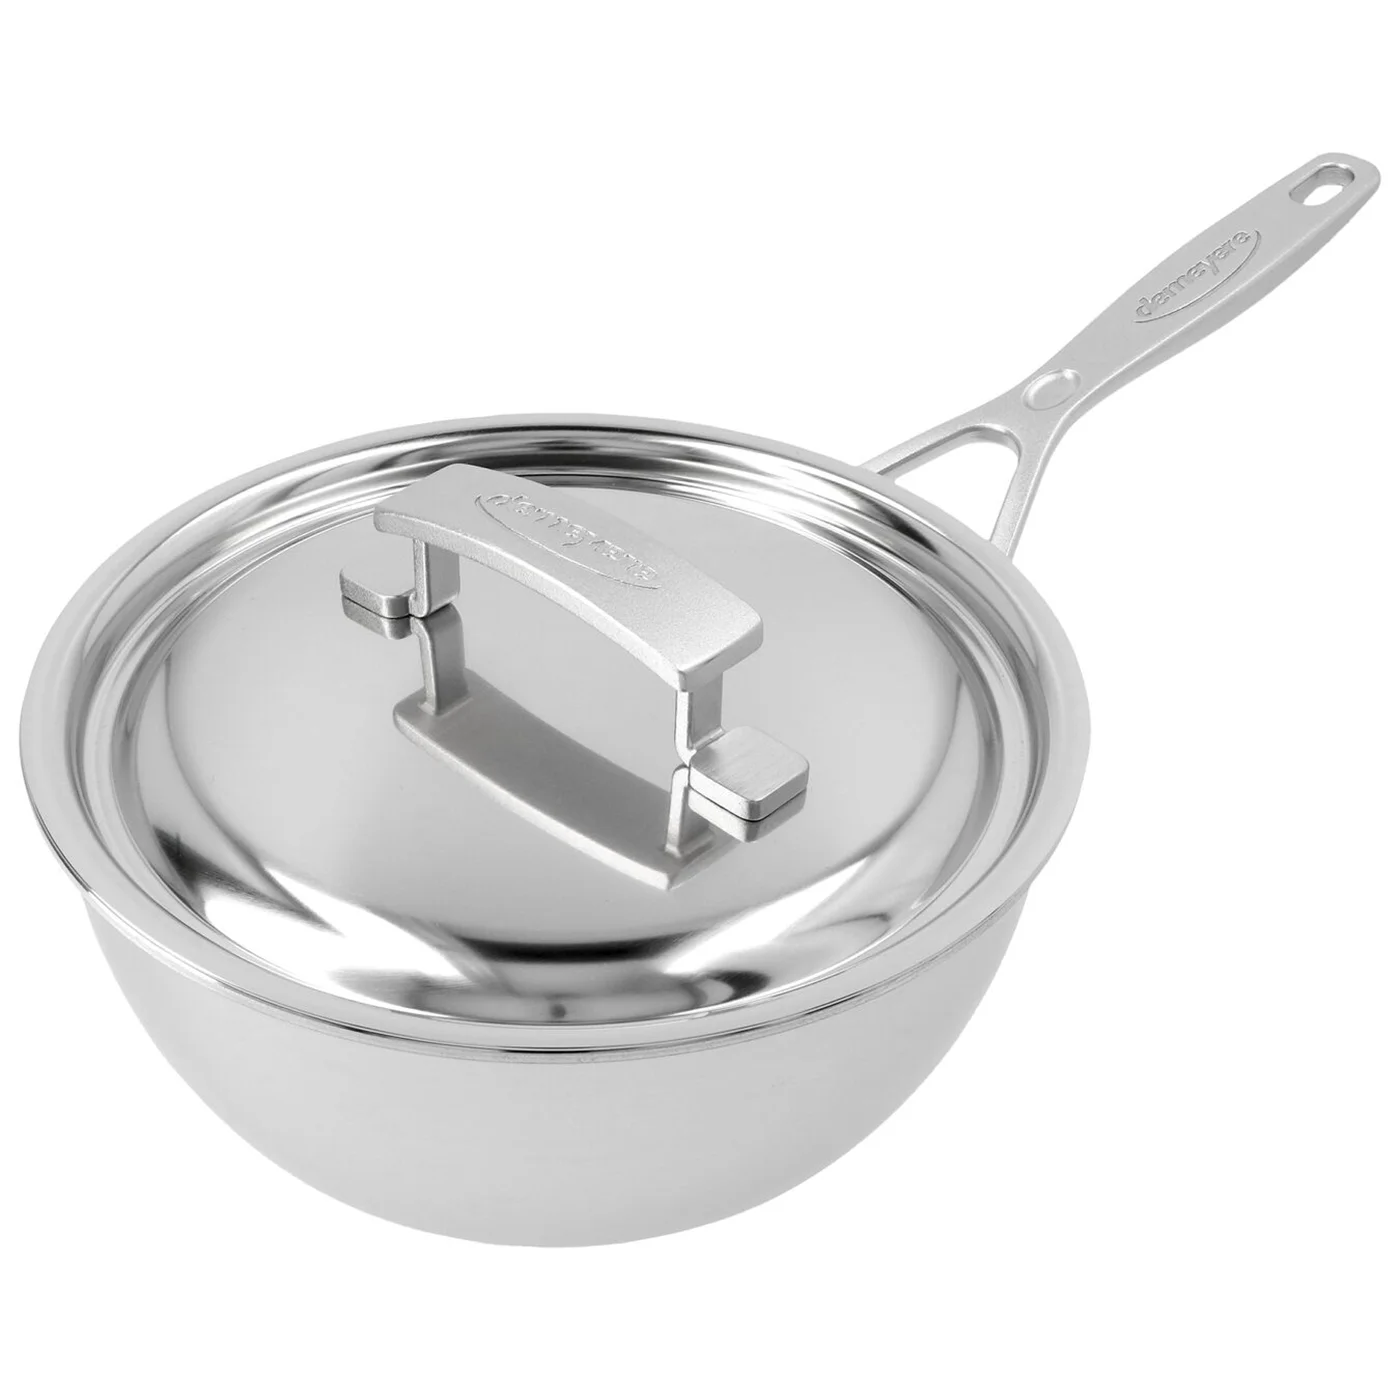 Demeyere Frying Pan 11 with Lid - Stainless Steel 5-Ply Skillet